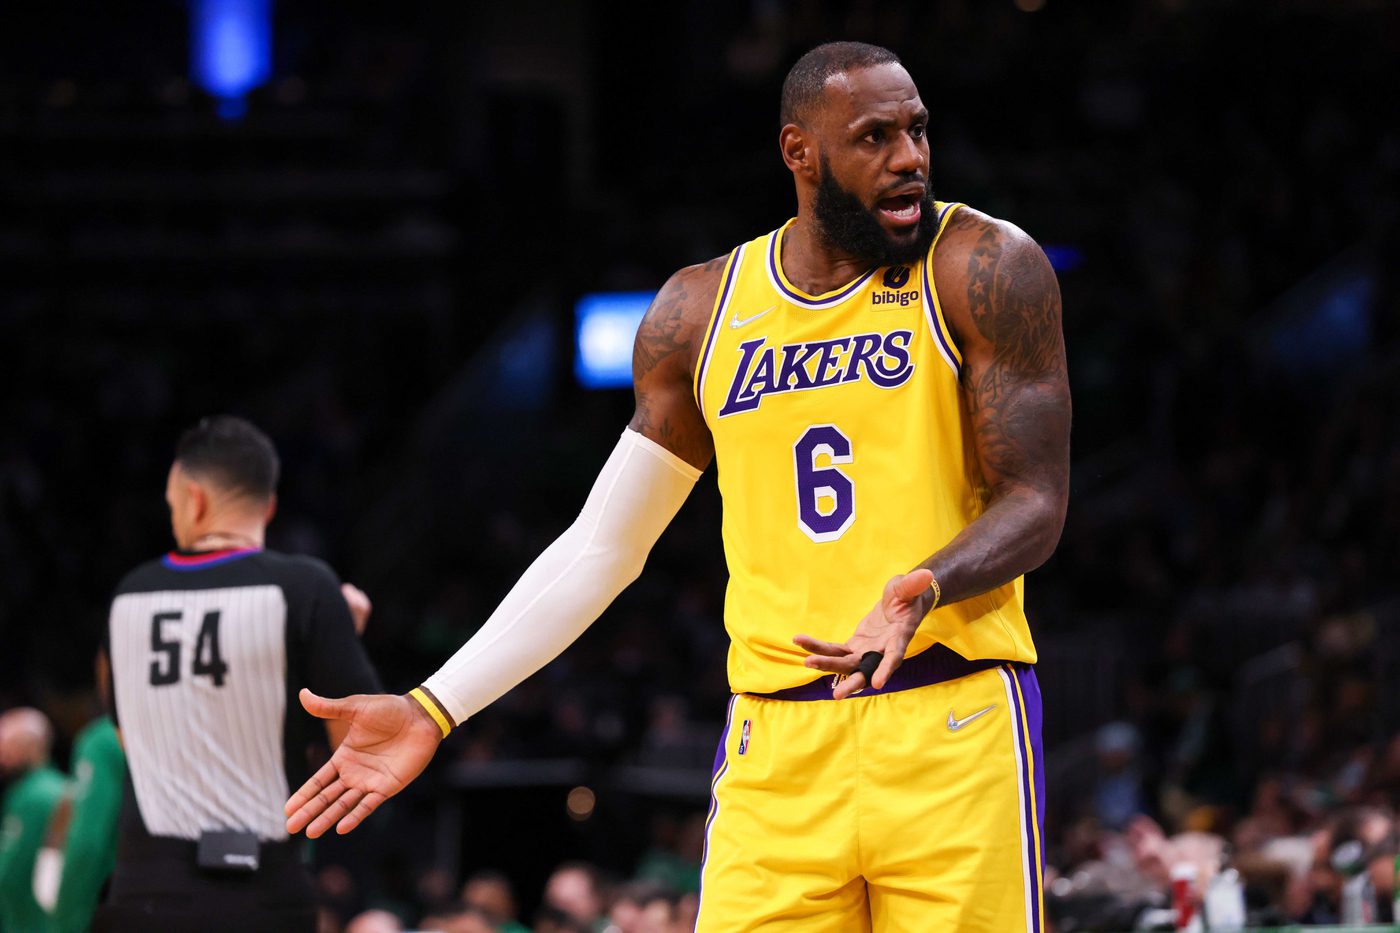 Nov 19, 2021; Boston, Massachusetts, USA; Los Angeles Lakers forward LeBron James (6) reacts during the second half against the Boston Celtics at TD Garden. Mandatory Credit: Paul Rutherford-USA TODAY Sports